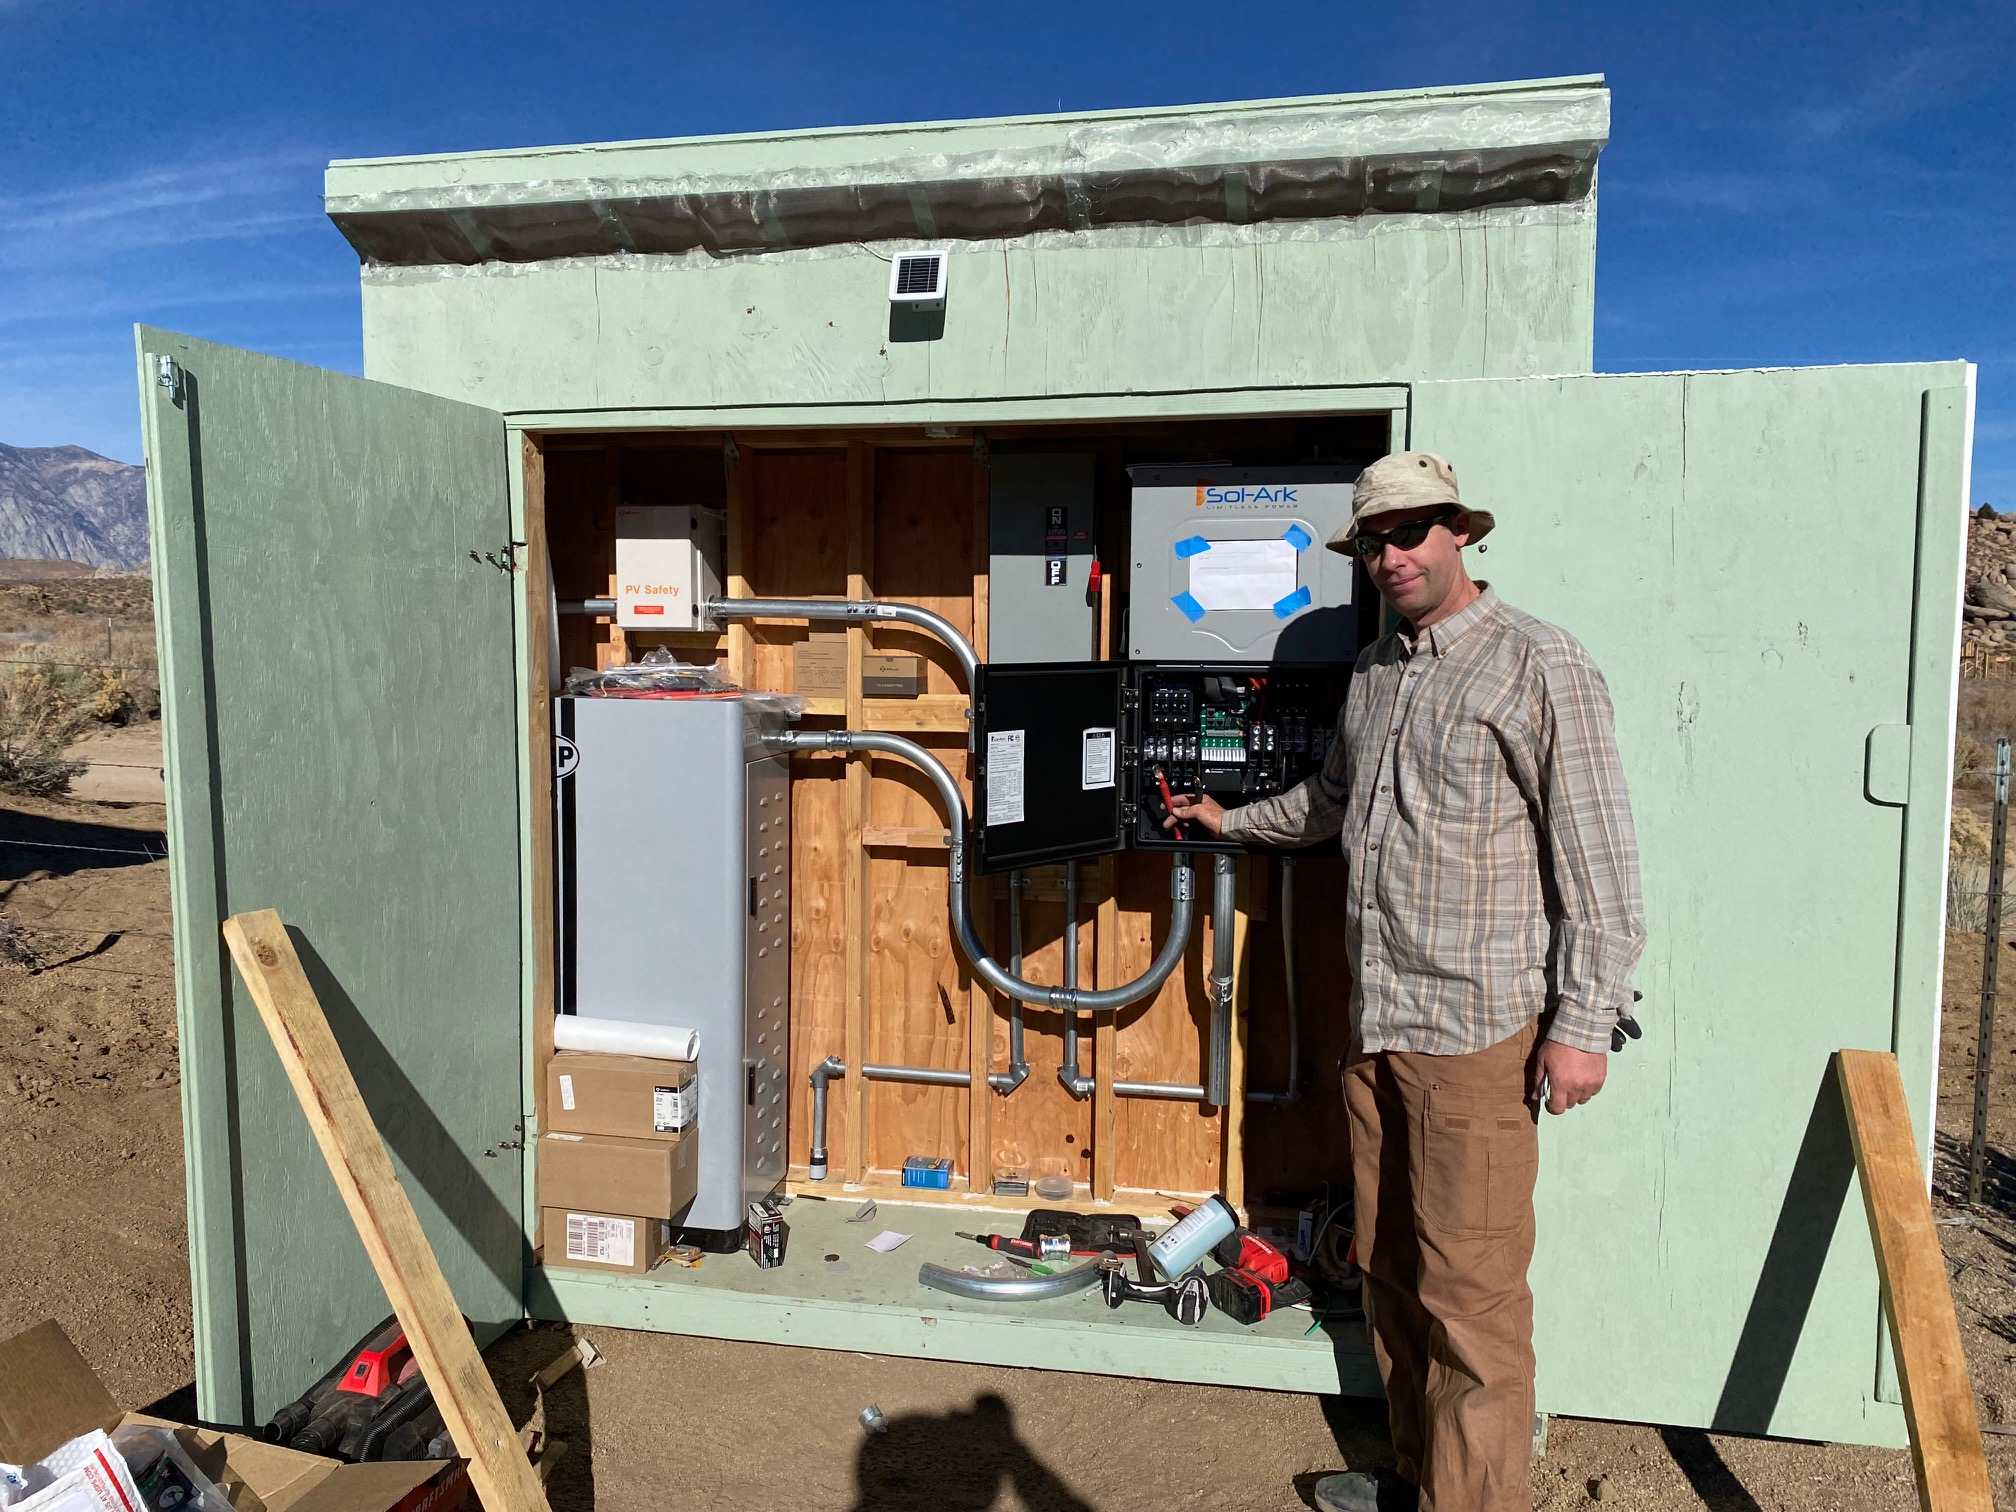 A man shows off an inverter in a temporary power shed